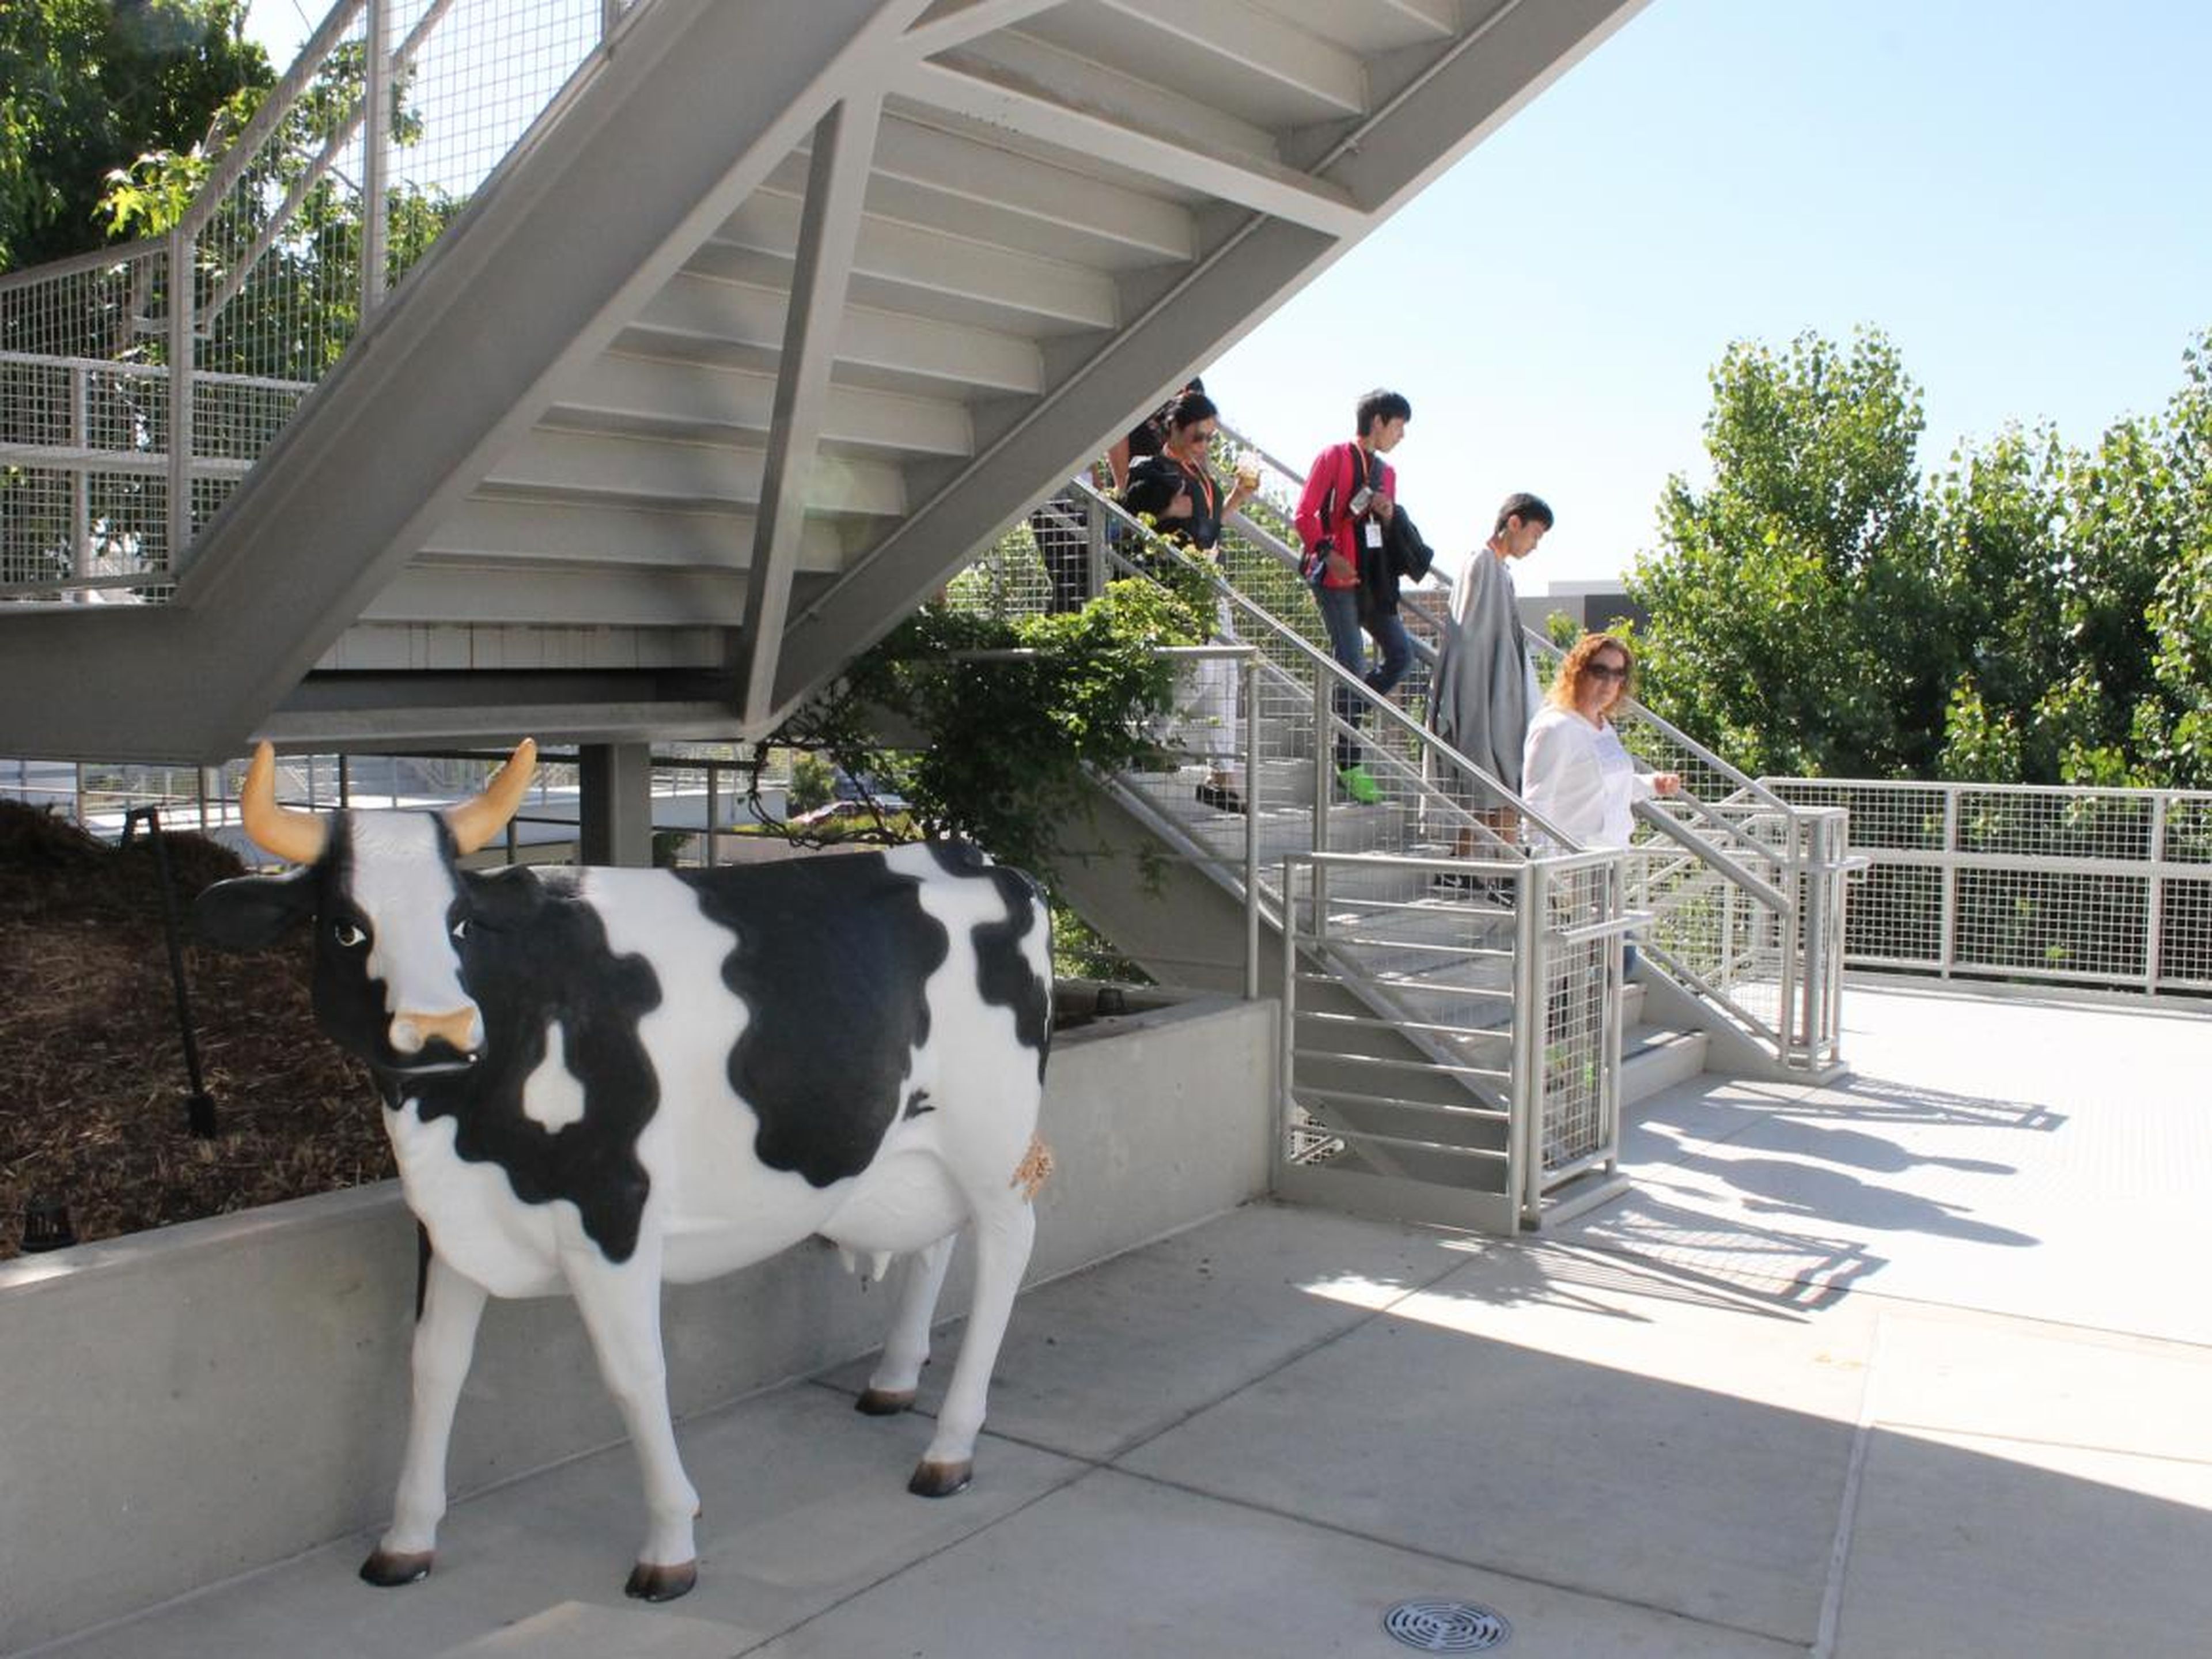 Just a cow, by a staircase.